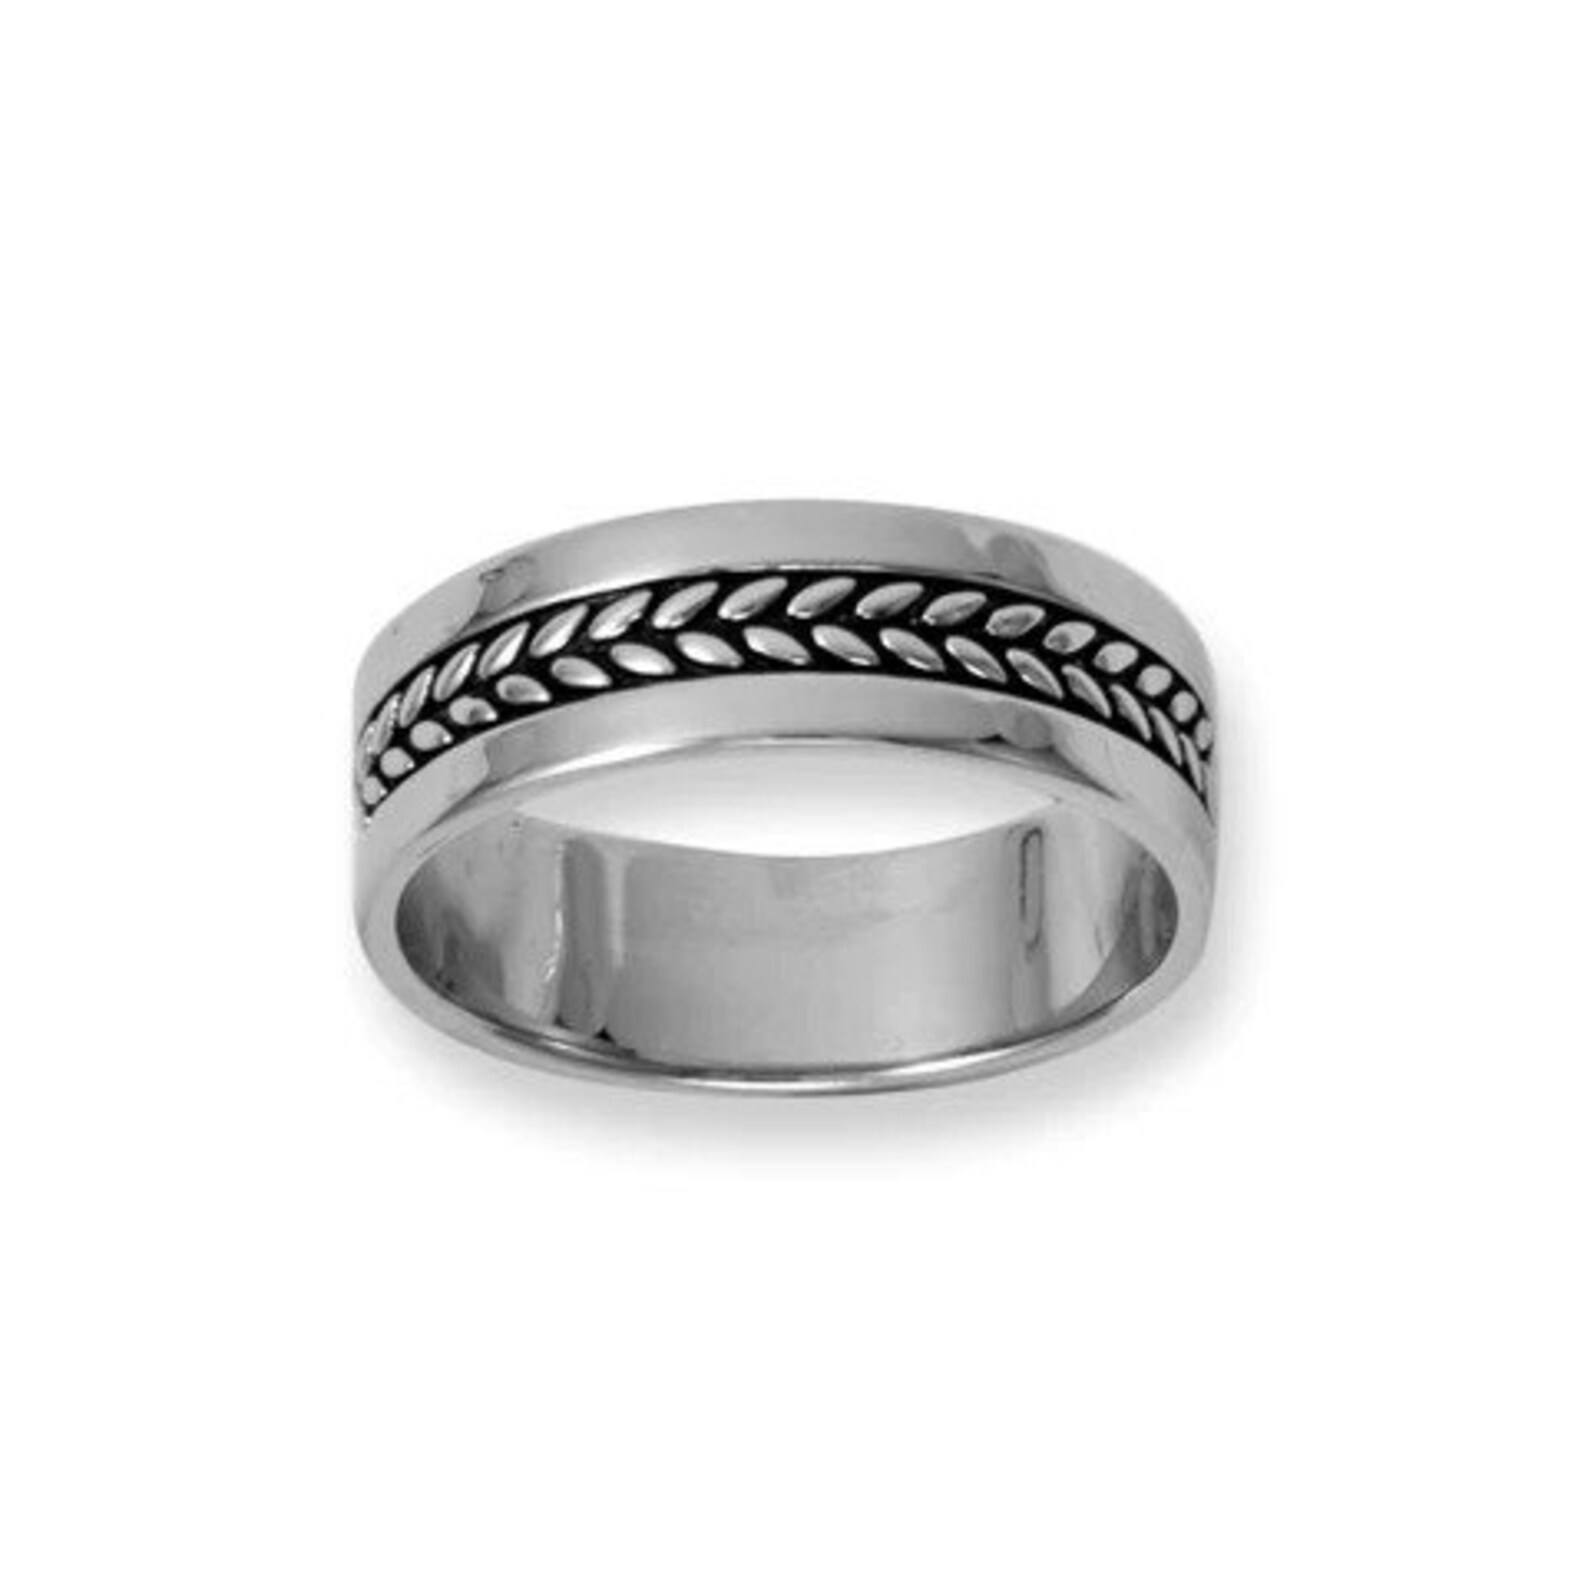 Sterling Silver, Rings, Men Ring, Gift Ideas, Gifts for Dad, Dad Gifts ...